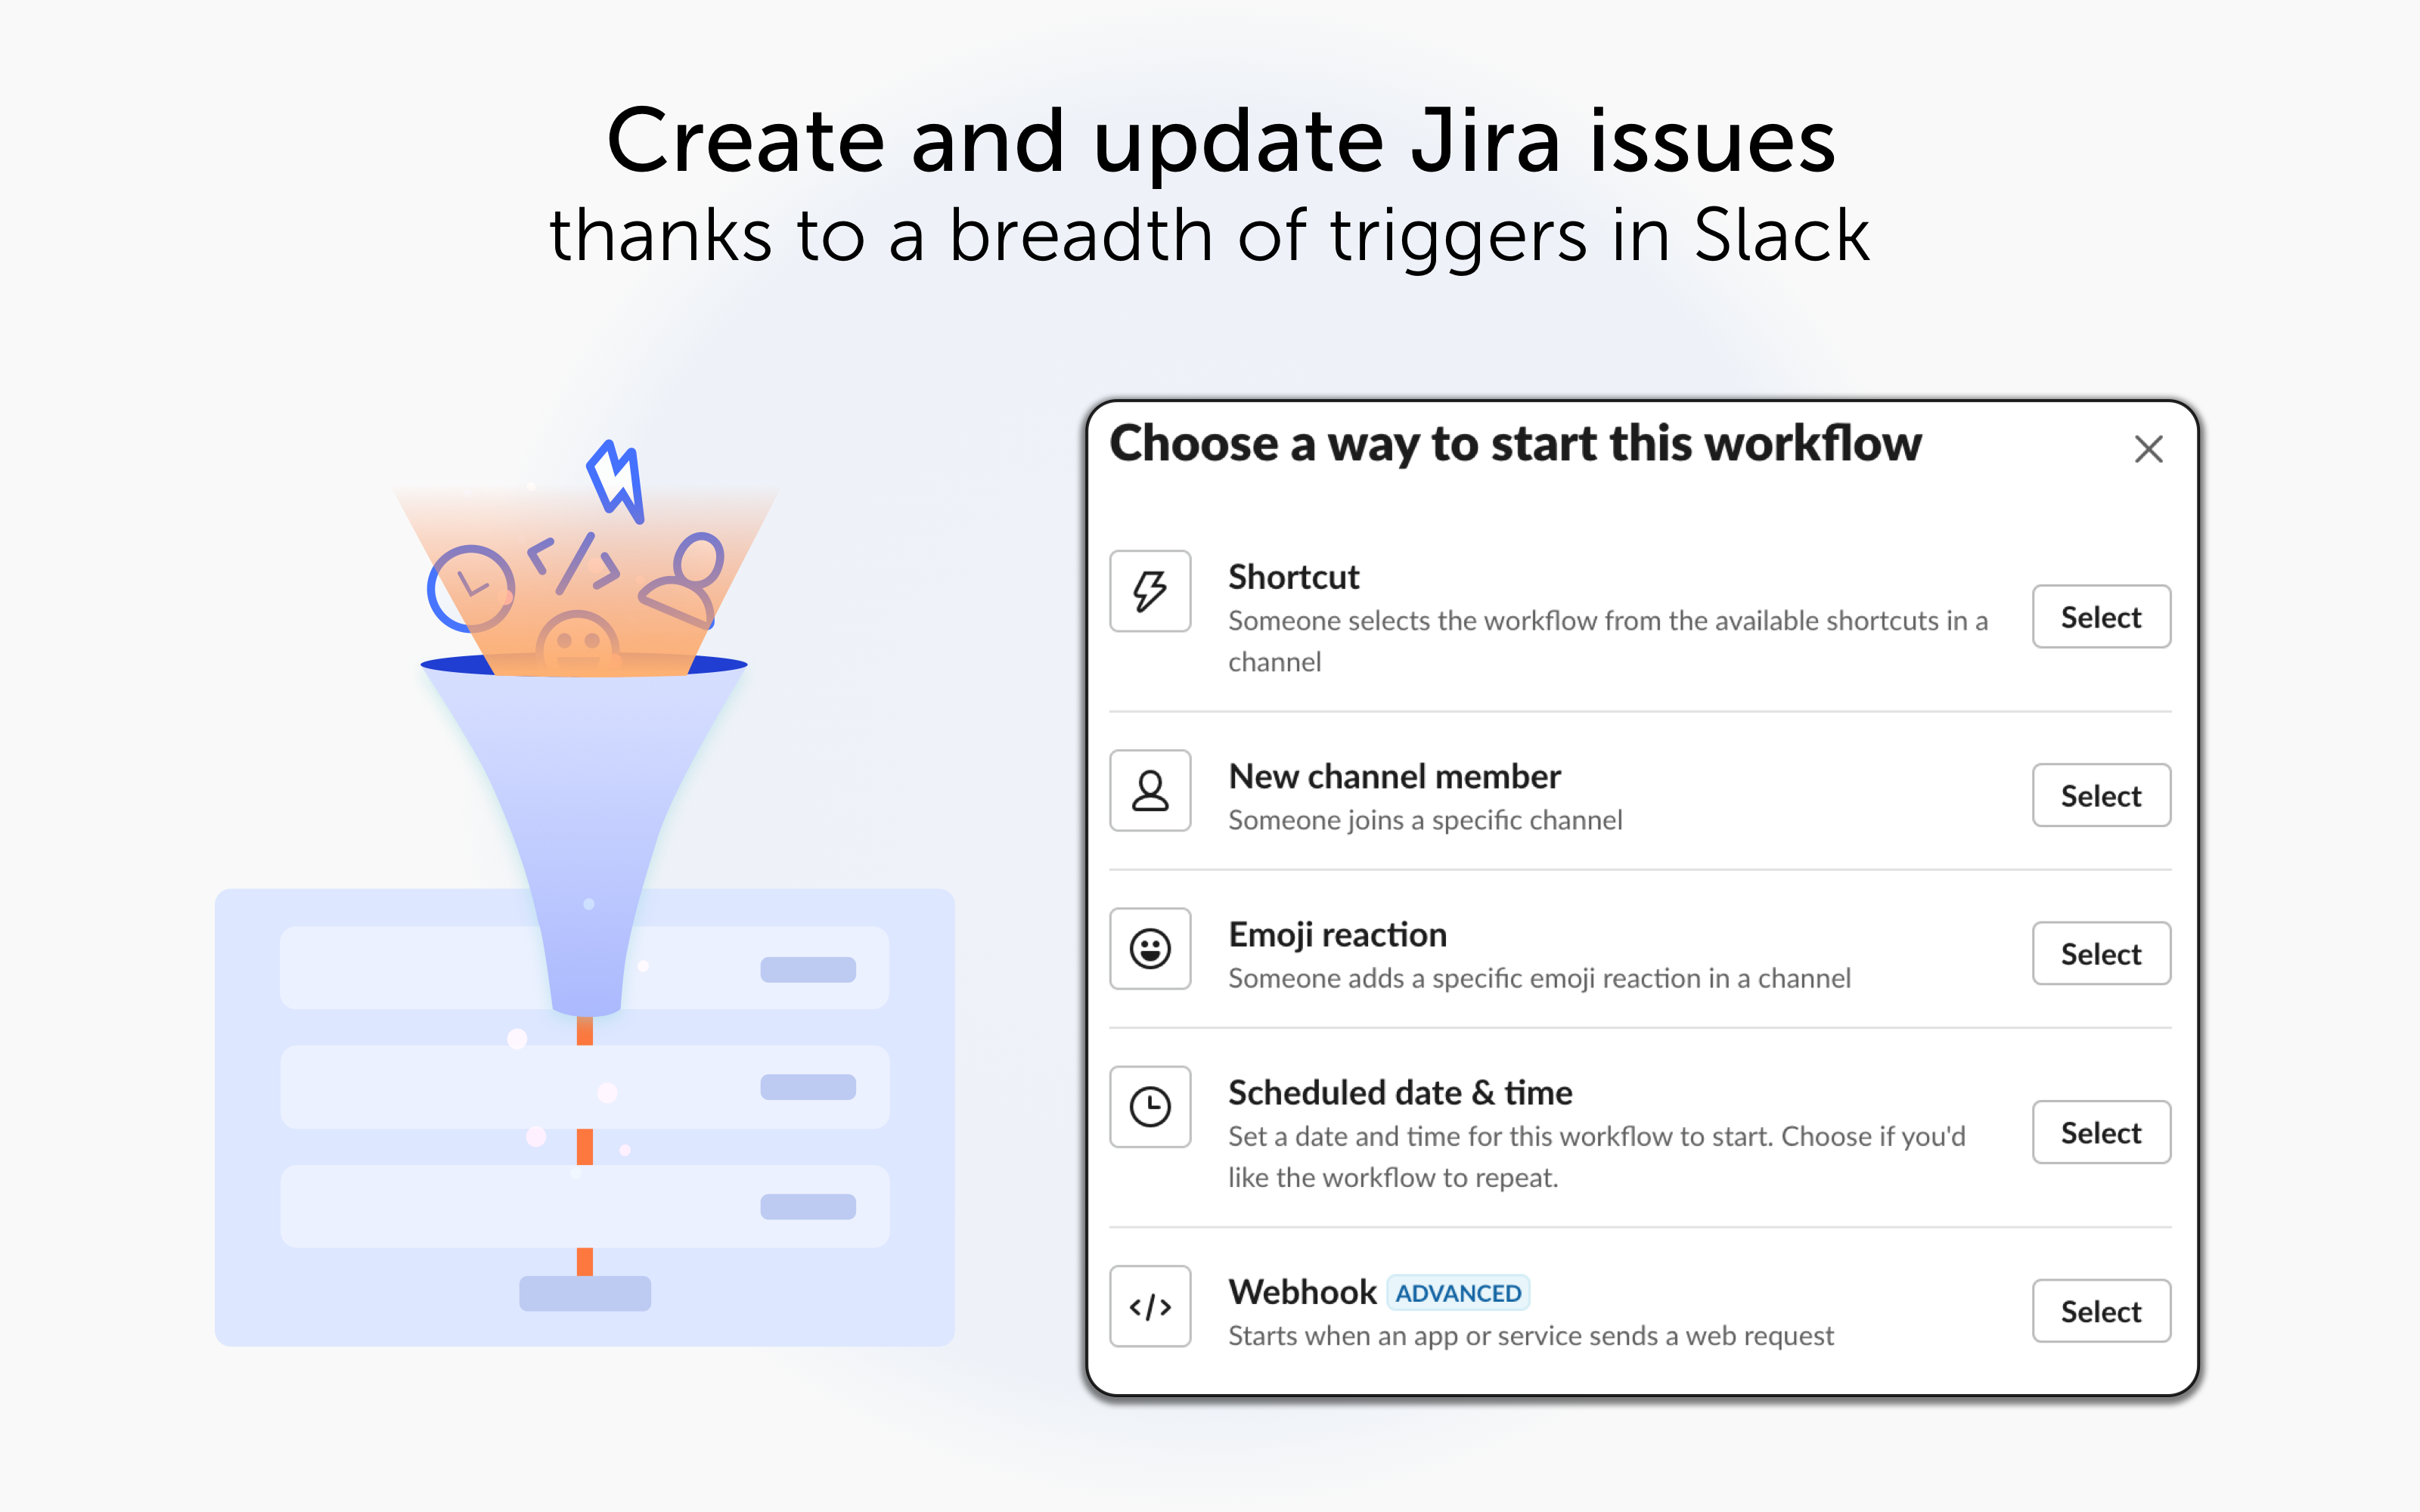 Create and update Jira issues thanks to a breadth of triggers in Slack. An selection of icons that correspond to Slack's Workflow Builder triggers, such as New Channel Member, Emoji Reaction, or Webhook.